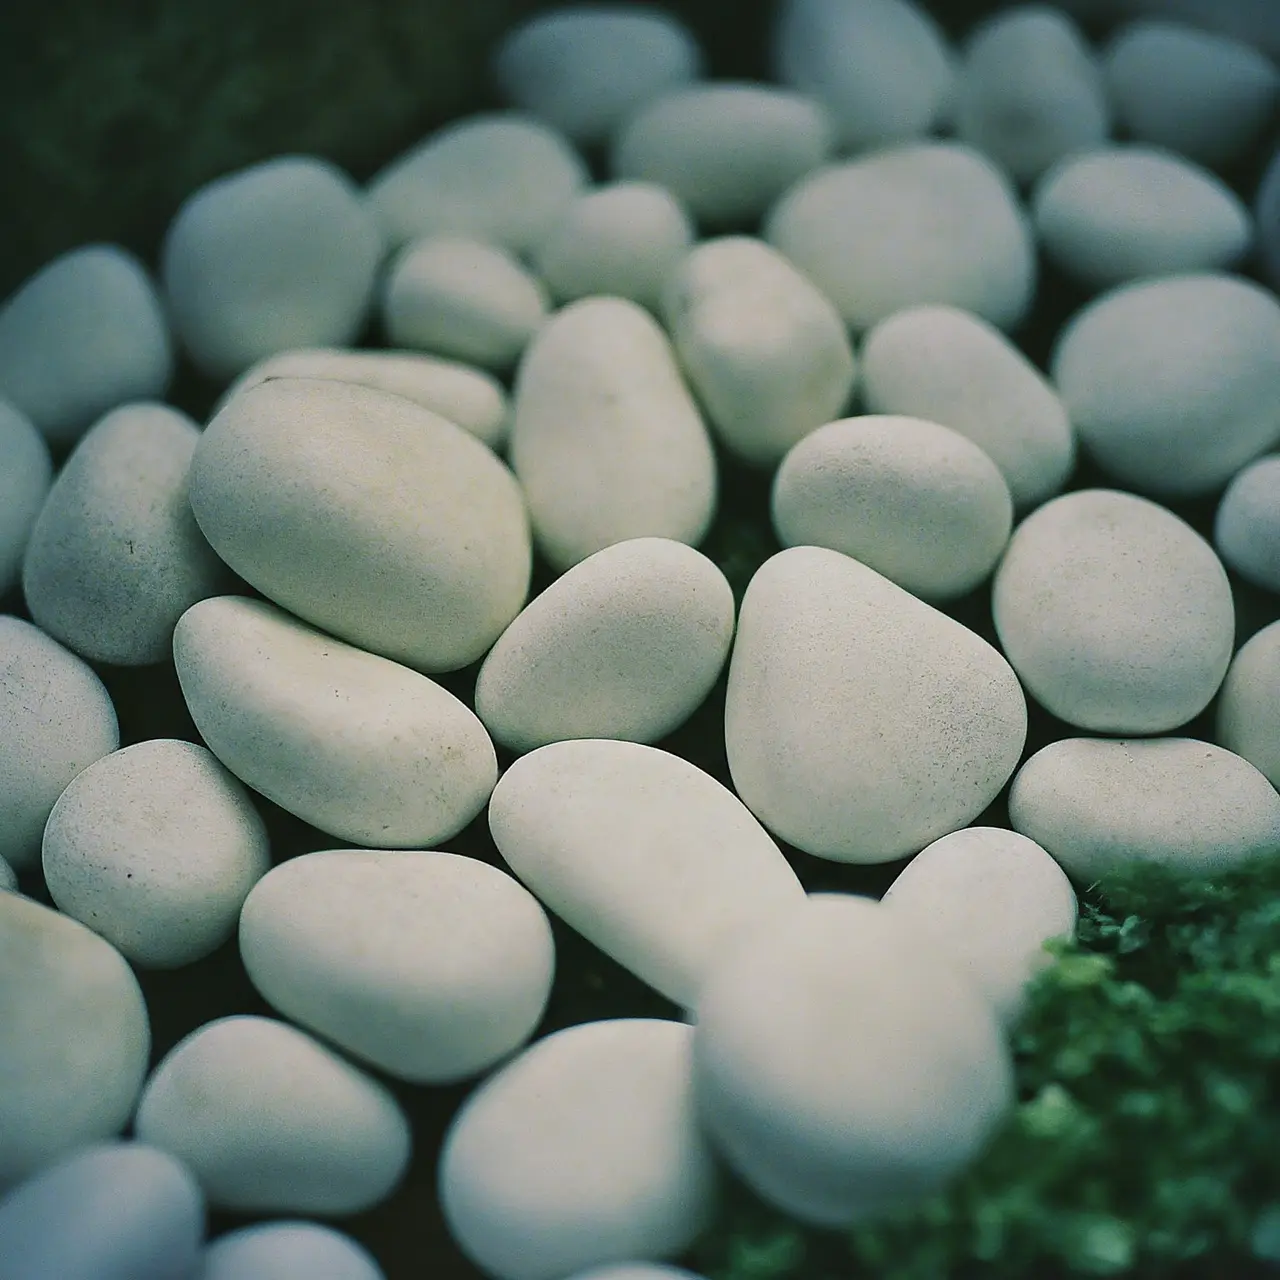 Close-up of snow white pebbles in a backyard garden setting. 35mm stock photo